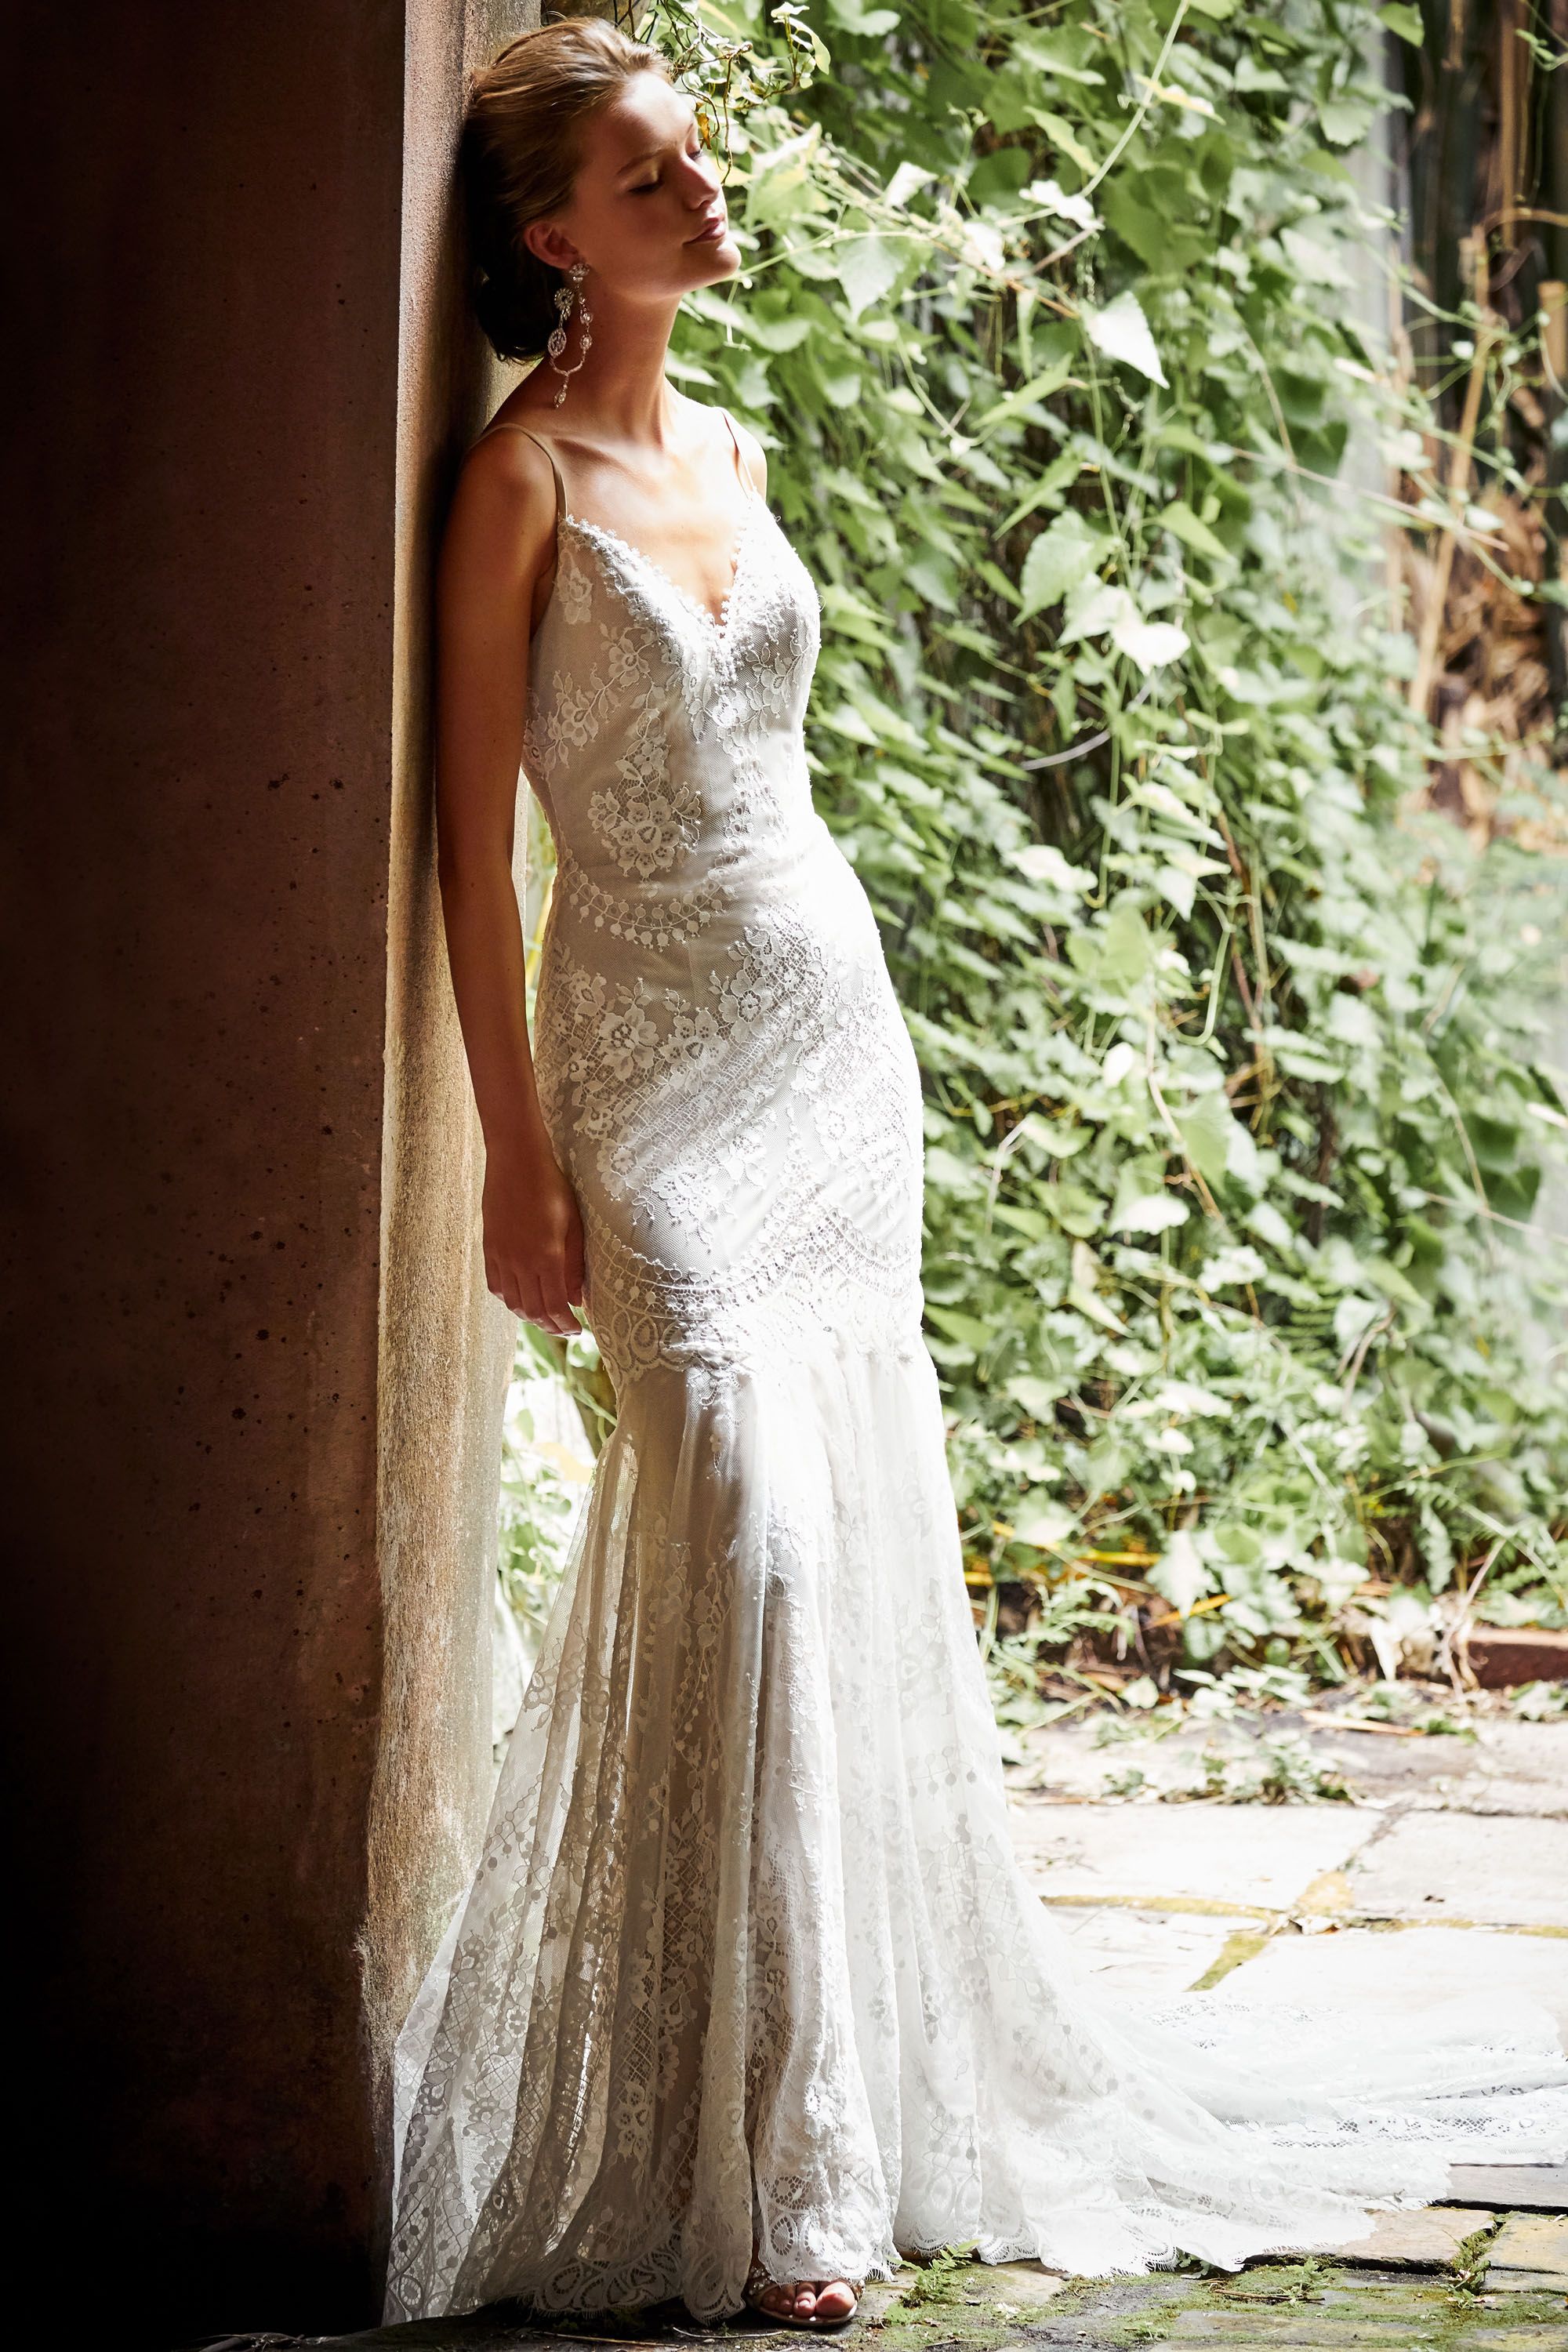 lure of lace gown bhldn